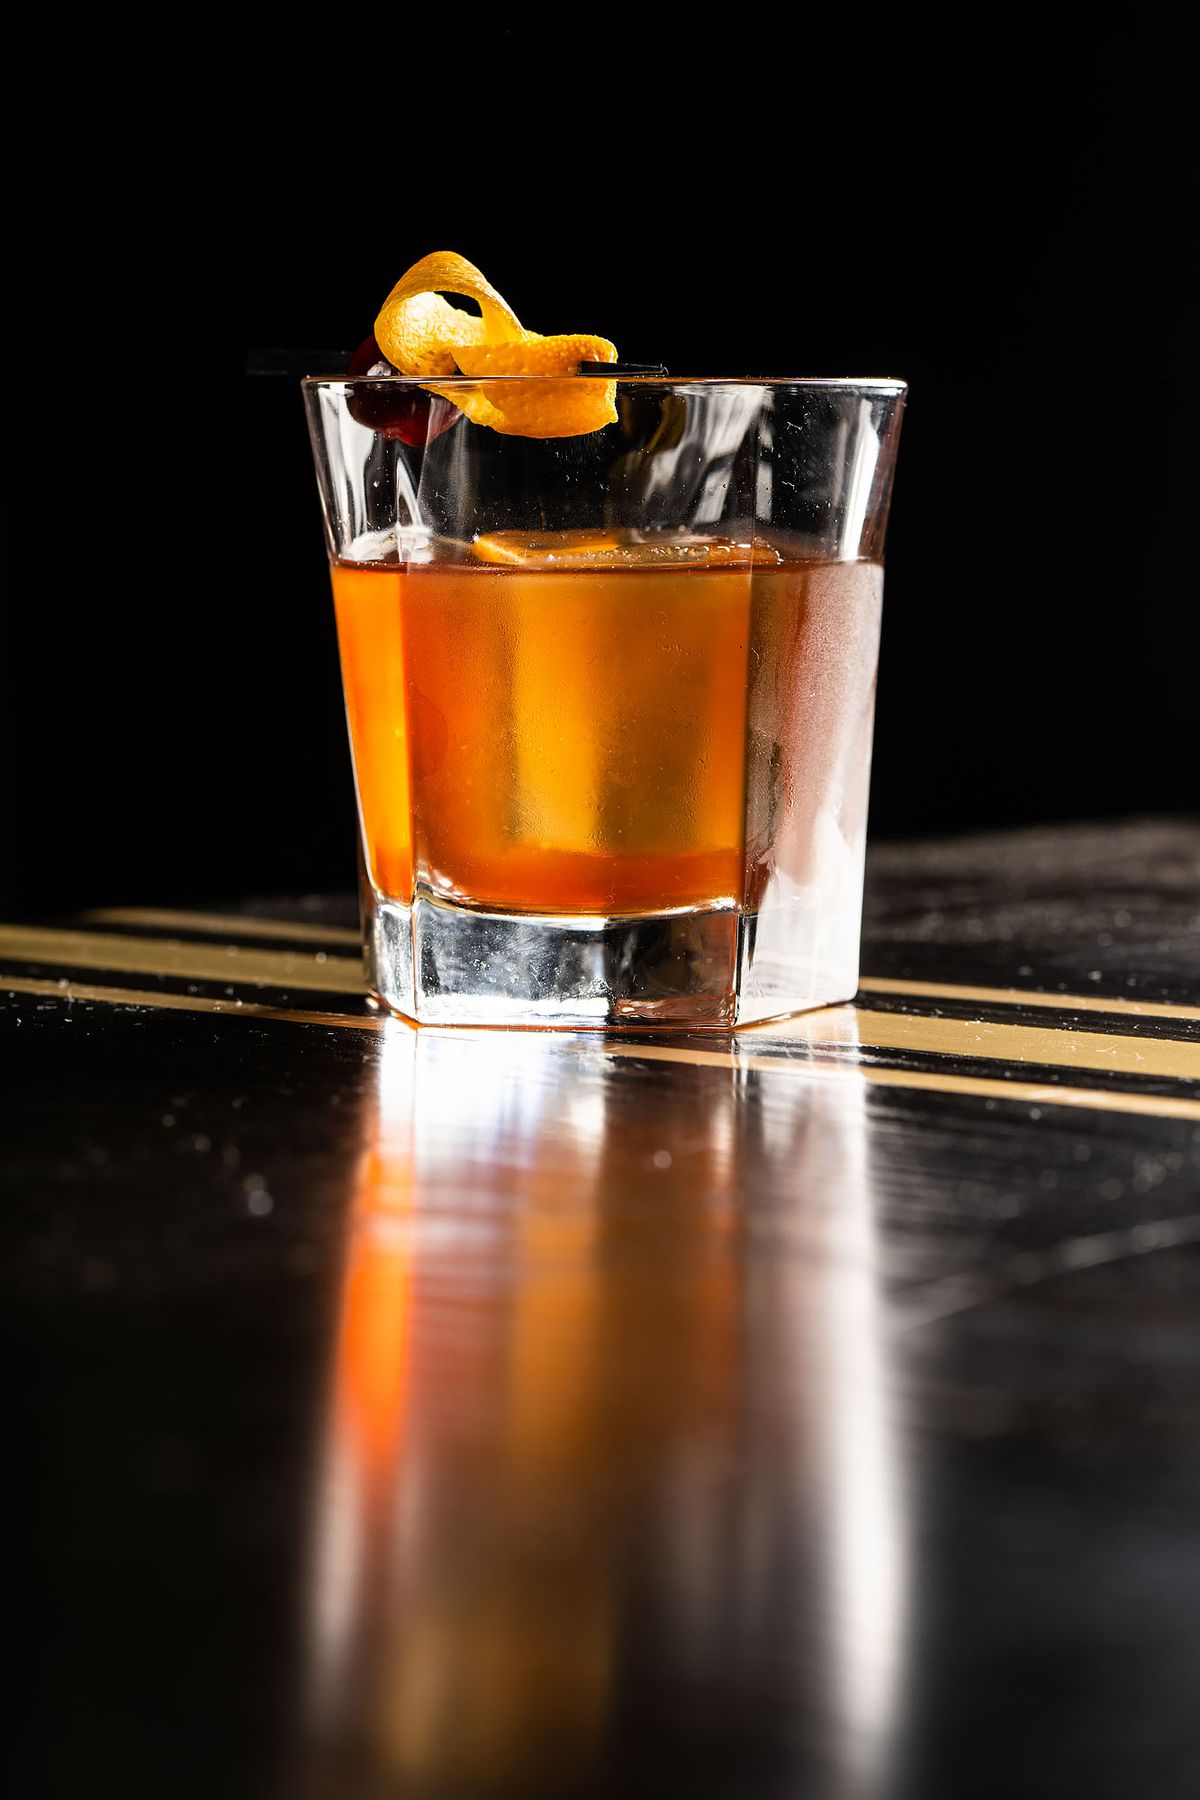 A simple cocktail with orange garnish on a black bartop.